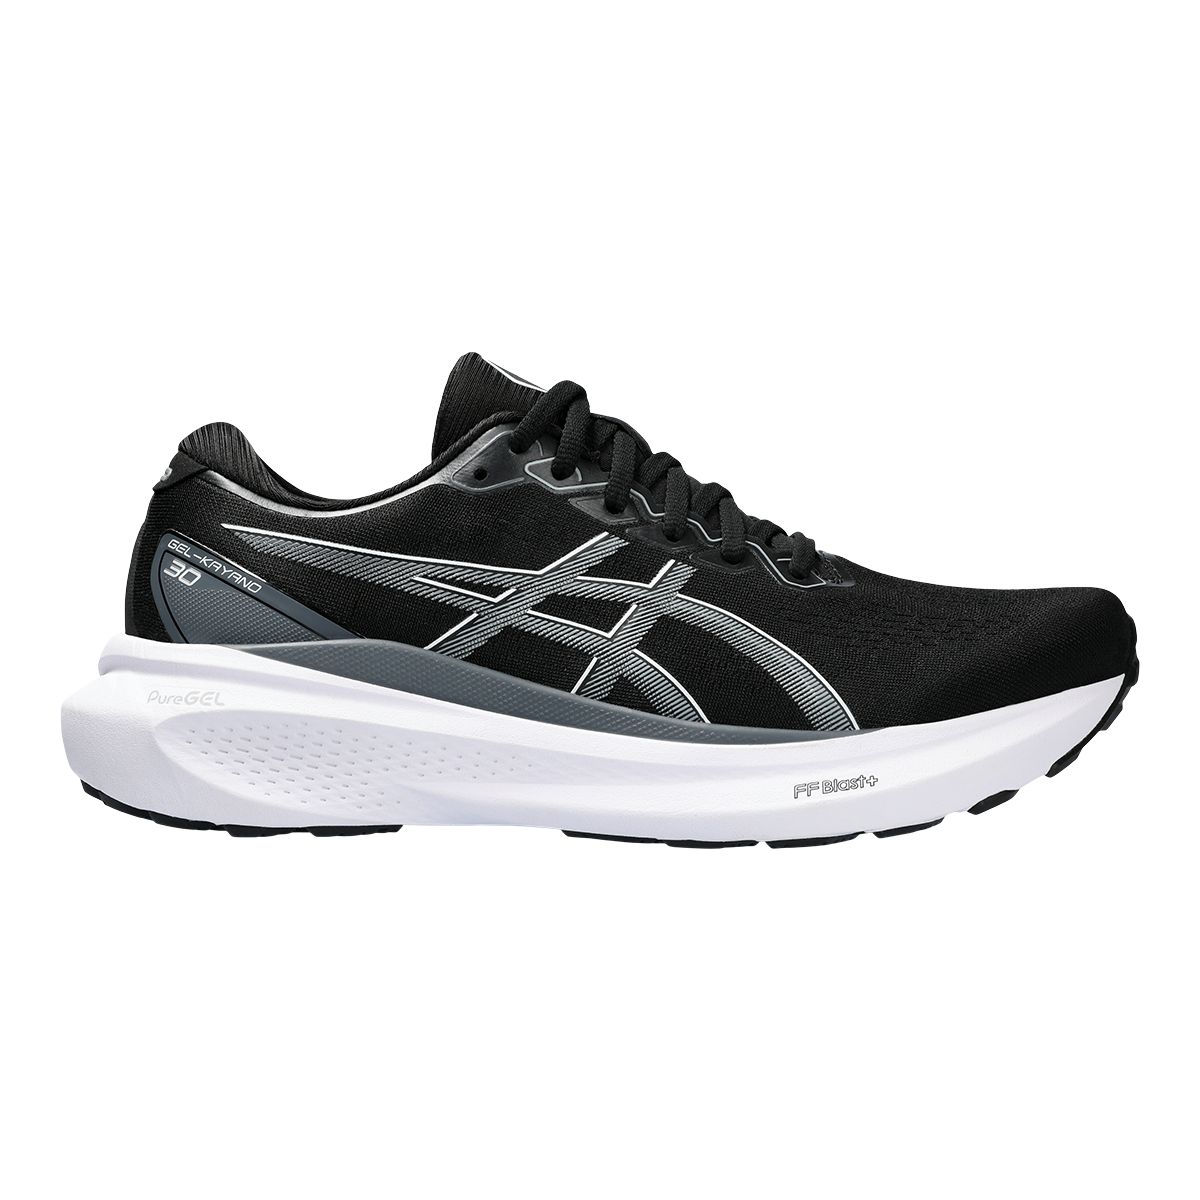 Image of Asics Men's Gel Kayano 3 Wide Breathable Knit Running Shoes